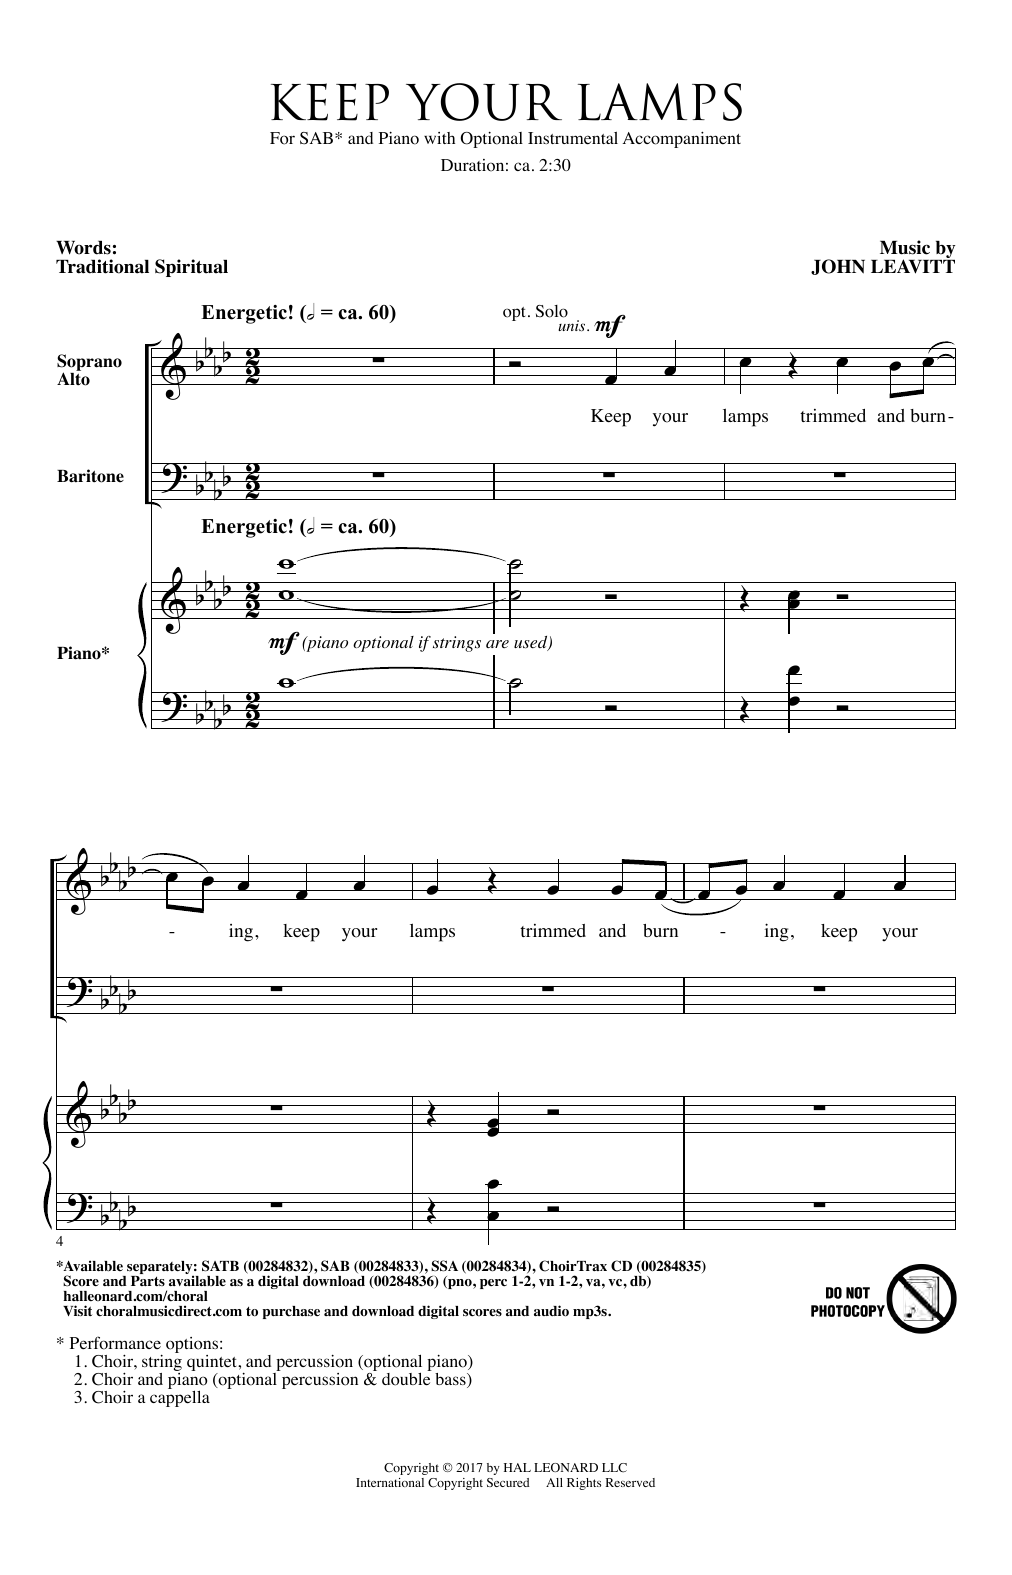 Download John Leavitt Keep Your Lamps Trimmed And Burning Sheet Music